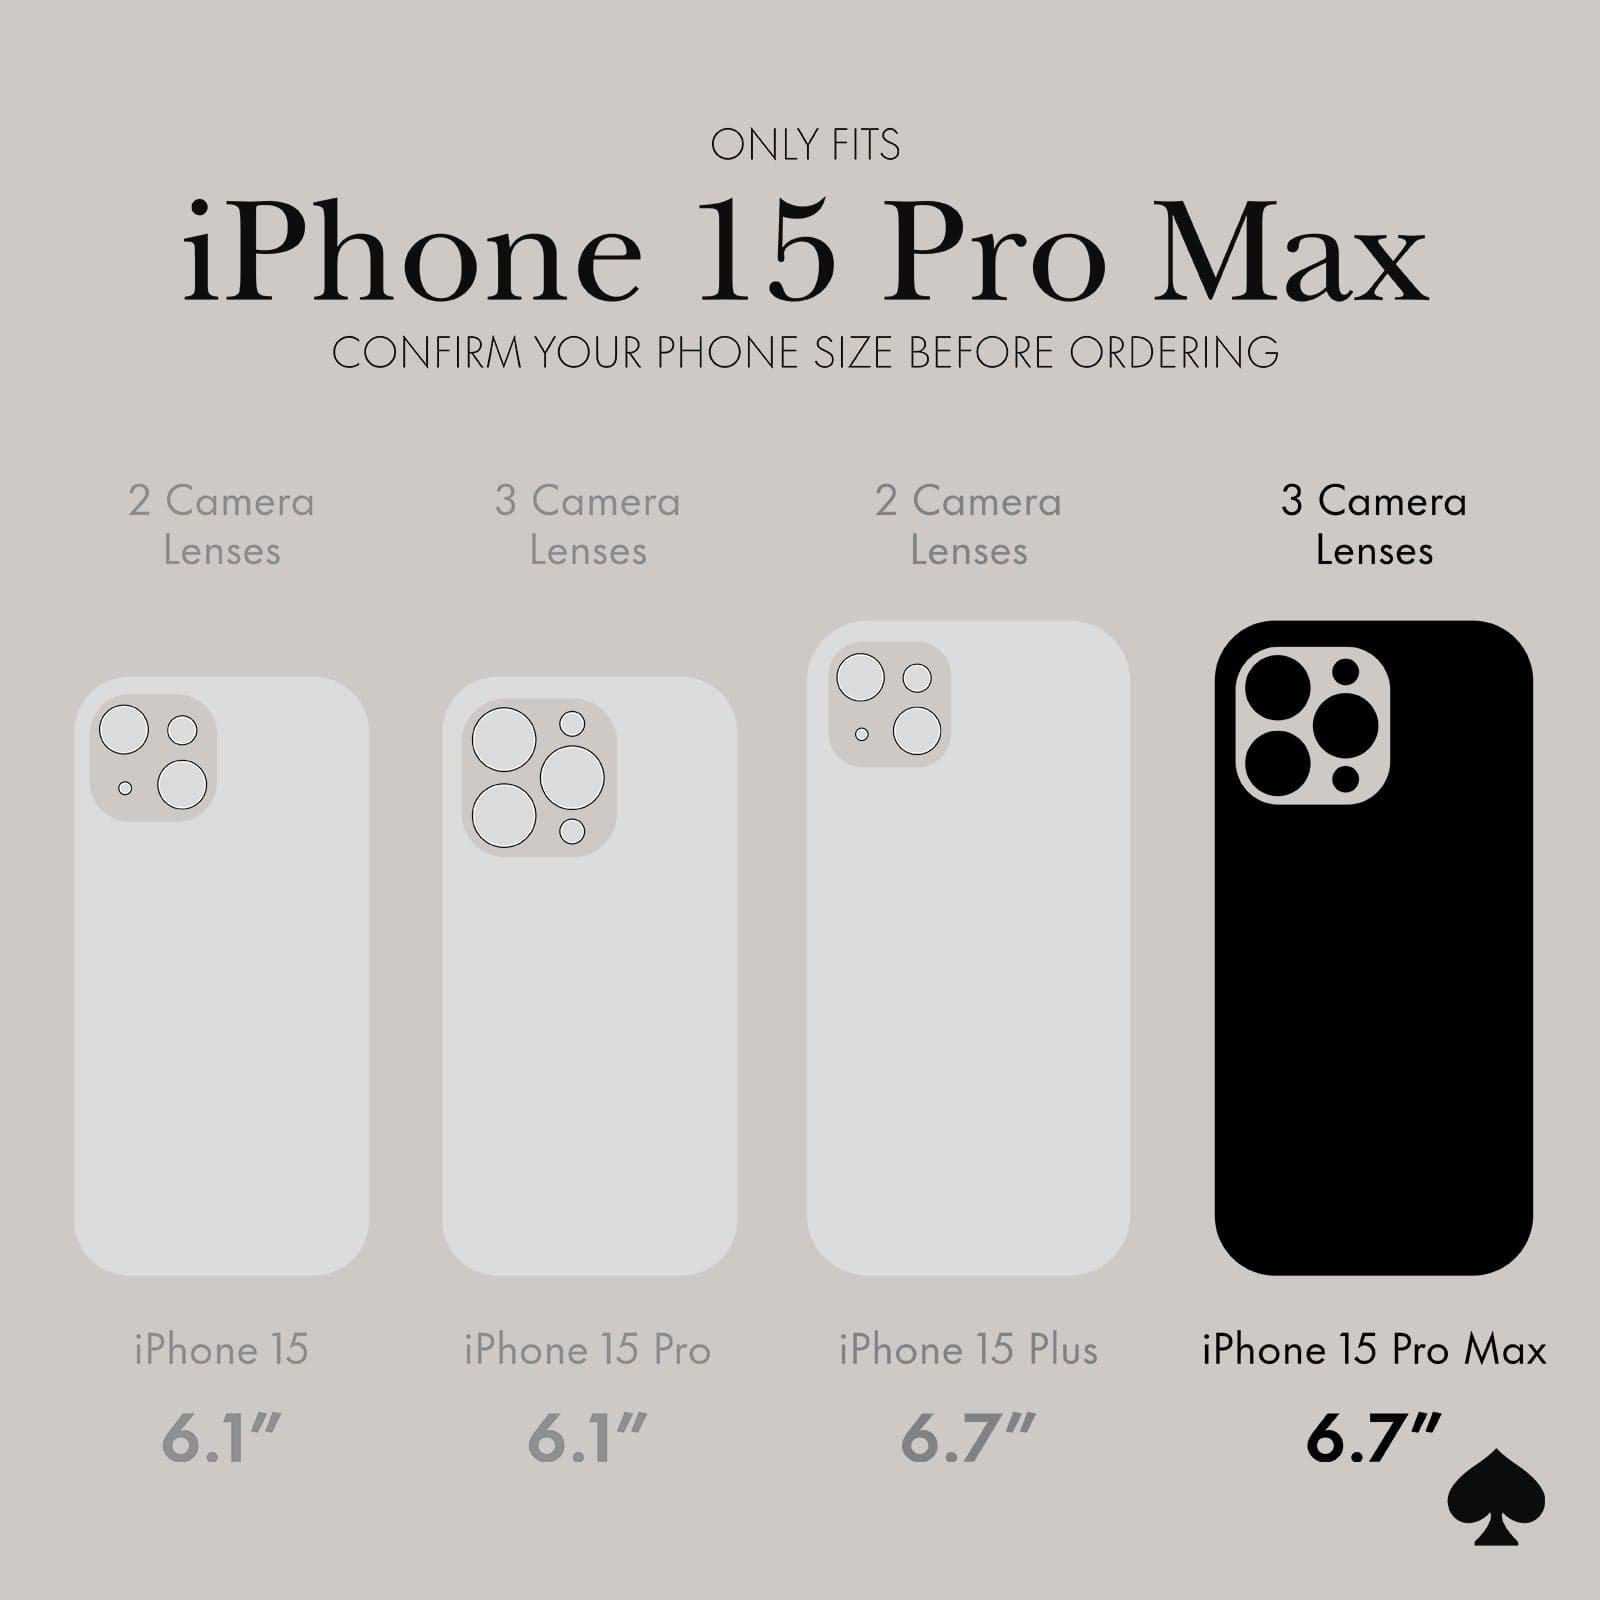 ONLY FITS IPHONE 15 PRO MAX. CONFIRM YOUR PHONE SIZE BEFORE ORDERING